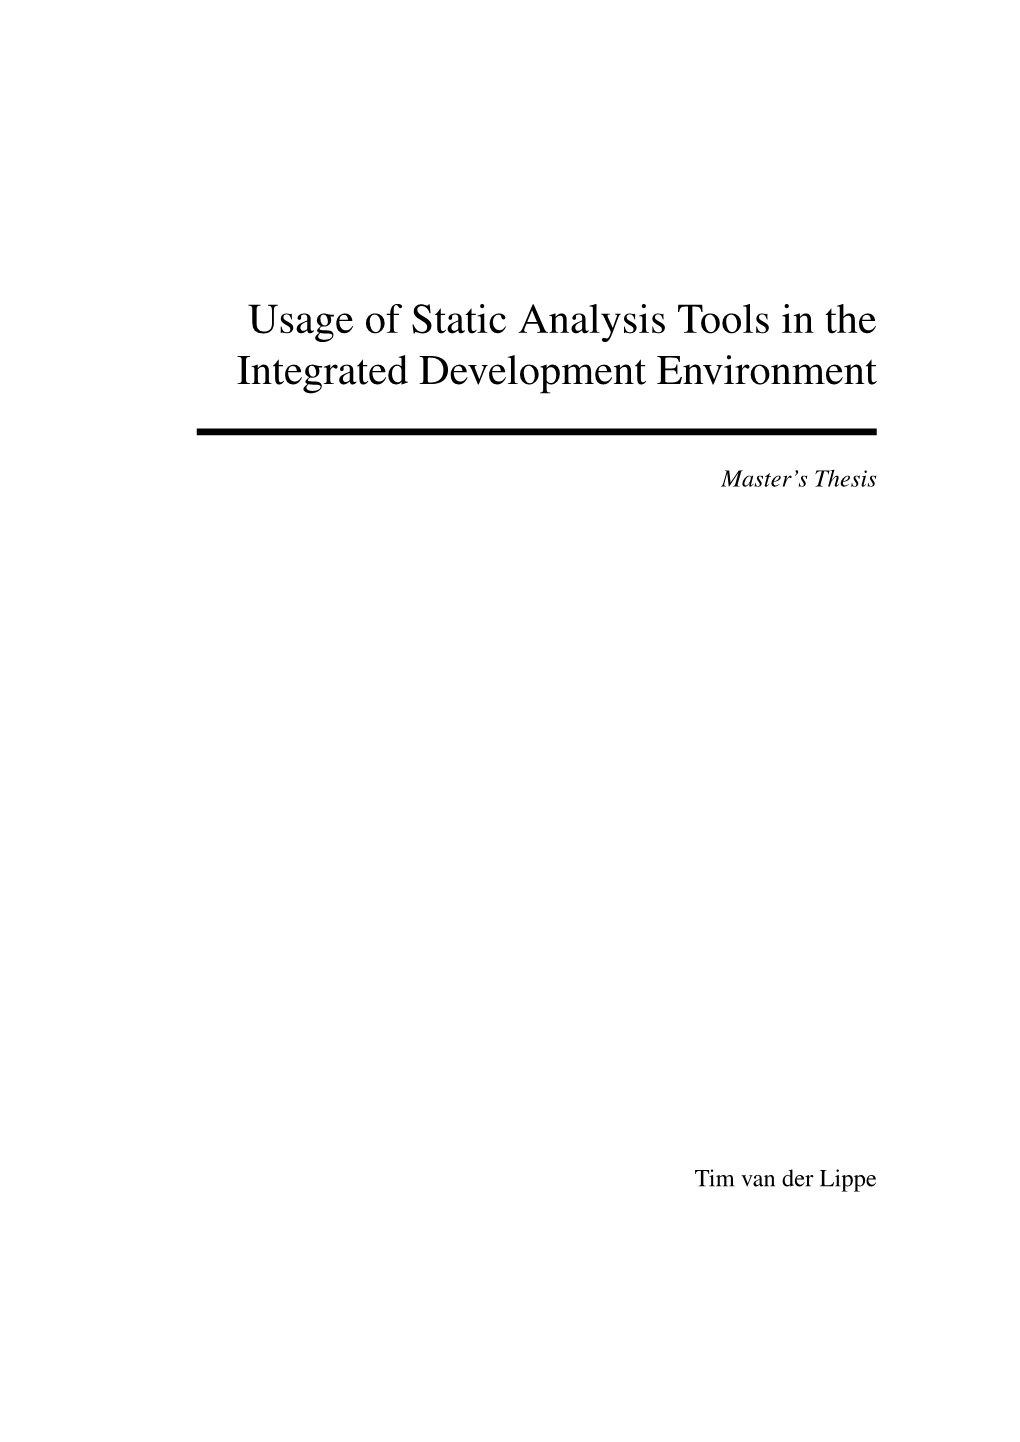 Usage of Static Analysis Tools in the Integrated Development Environment